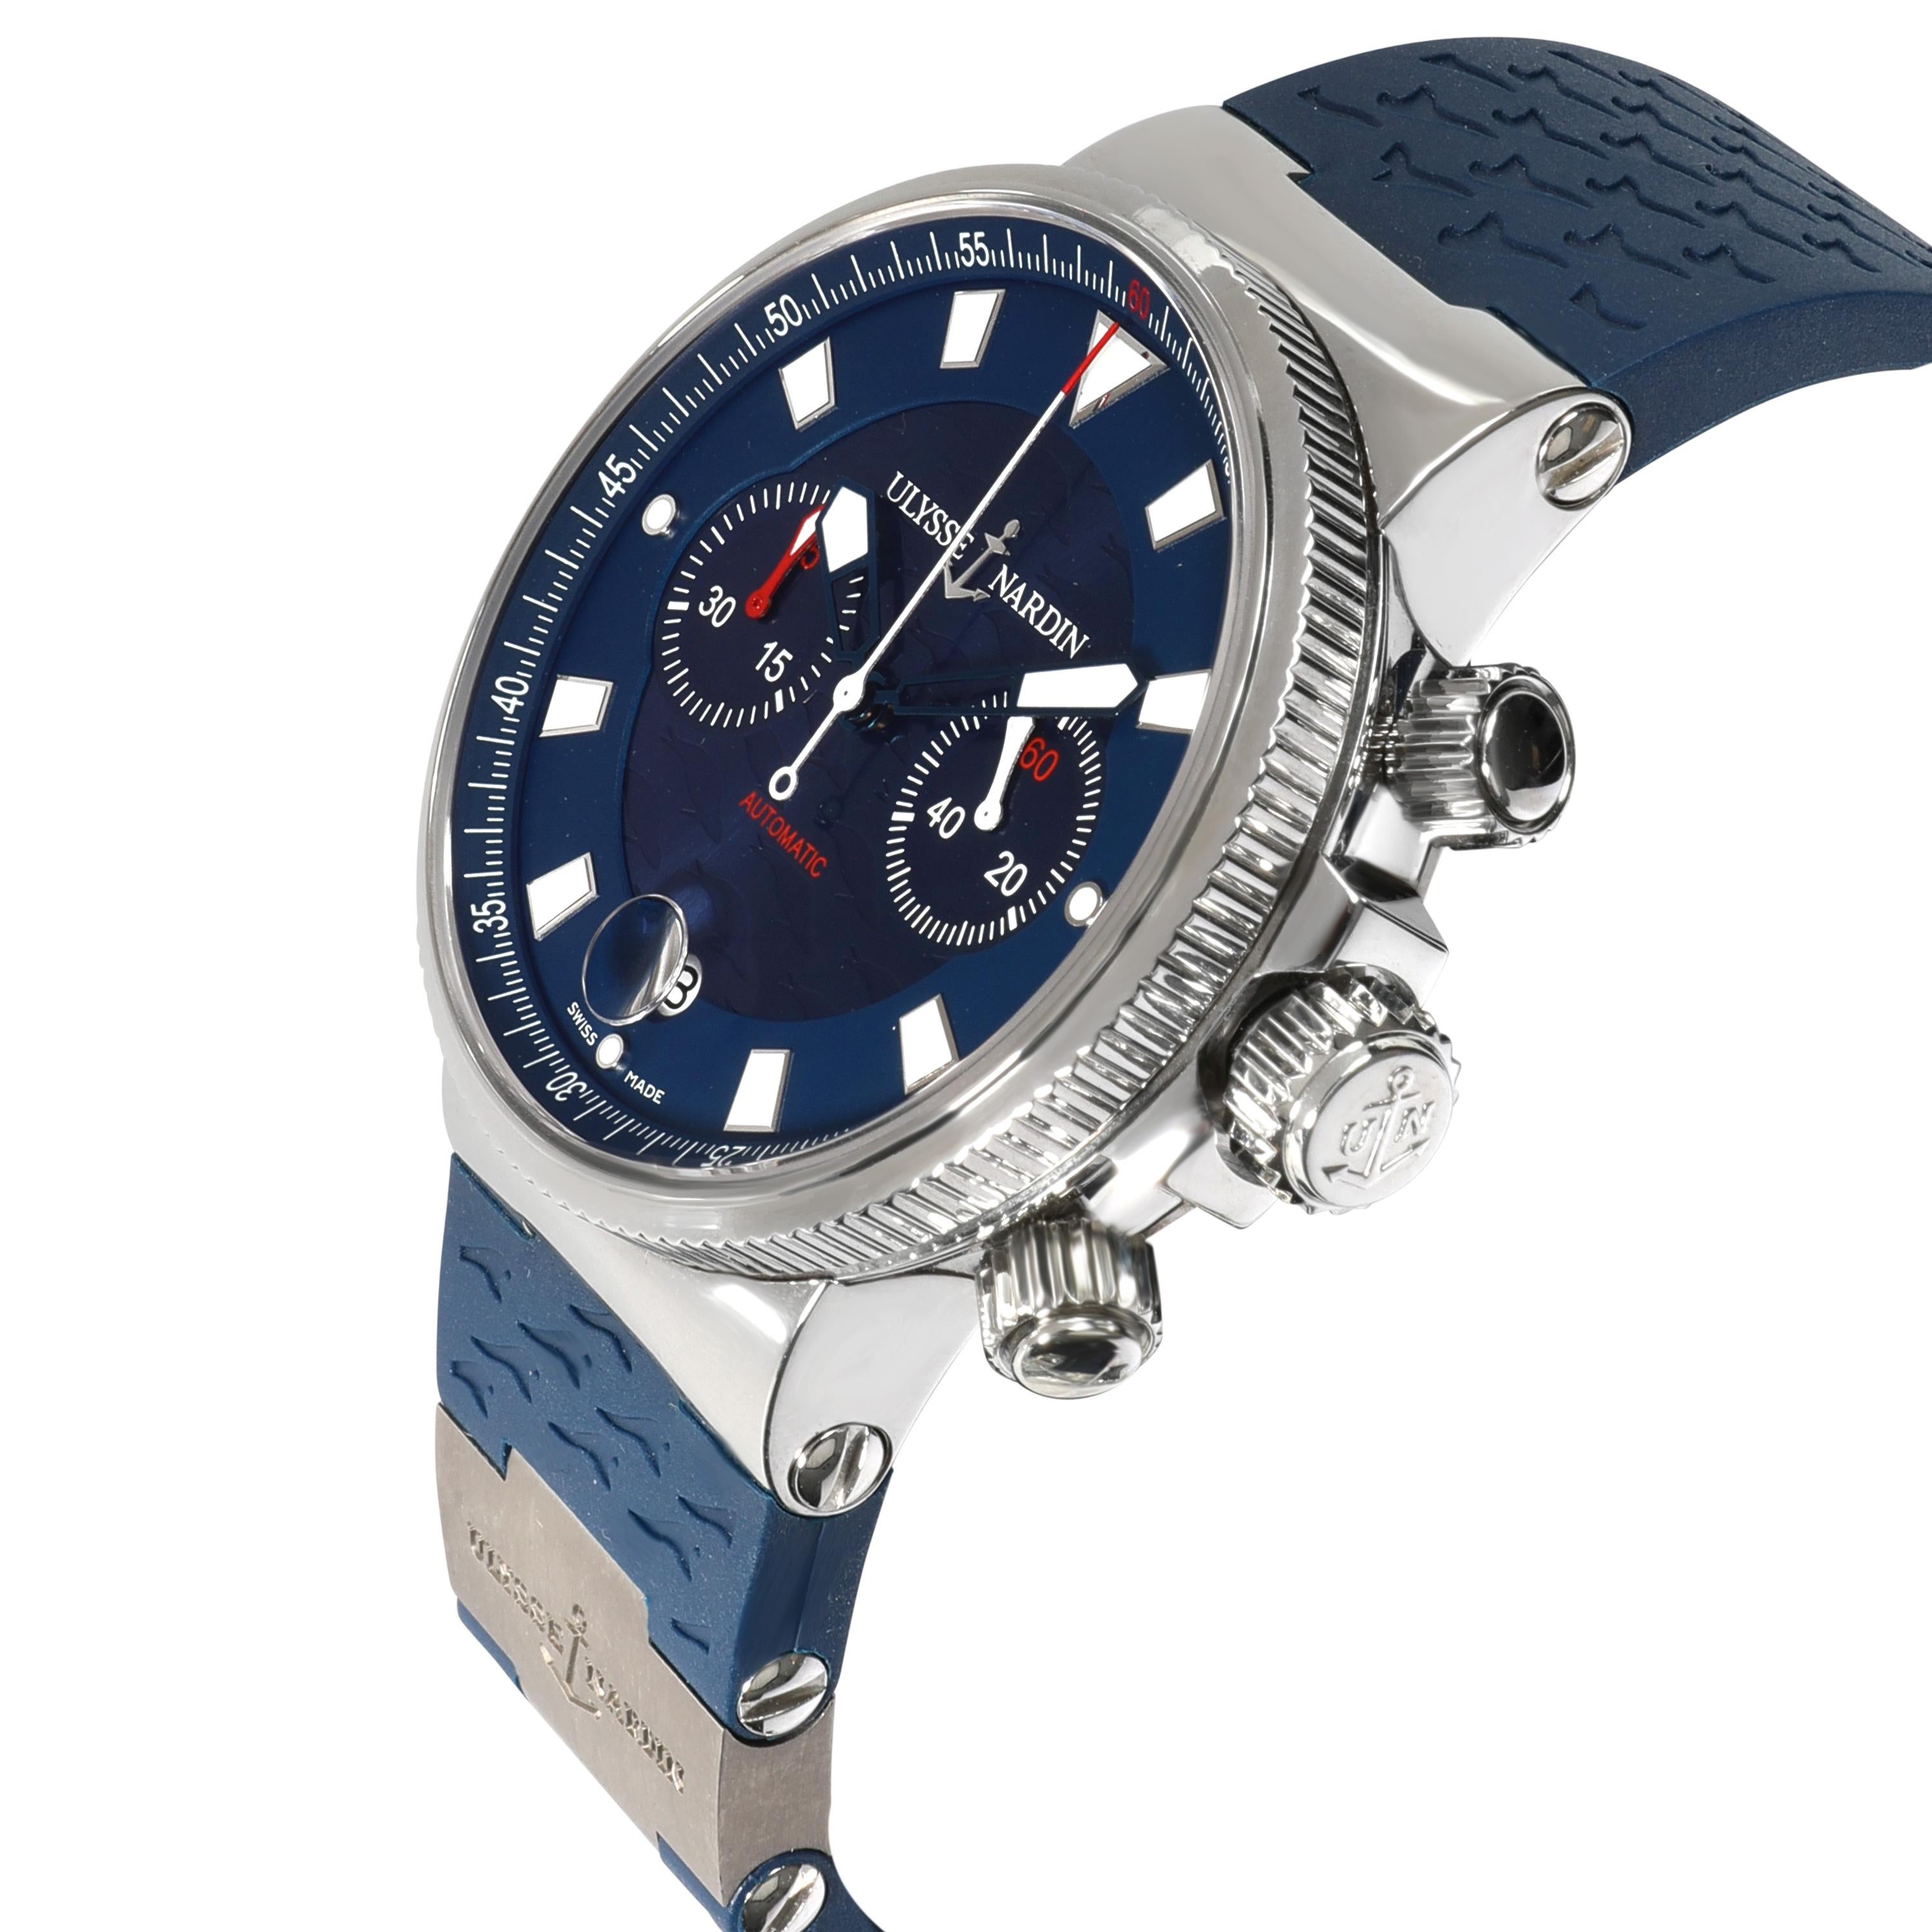 

Ulysse Nardin 353-68 Men's Watch in Steel

SKU: 010387

PRIMARY DETAILS
Brand:  Ulysse Nardin
Model: Blue Seal
Country of Origin: Switzerland
Movement Type: Mechanical: Automatic/Kinetic
Year Manufactured: 2008
Year of Manufacture: